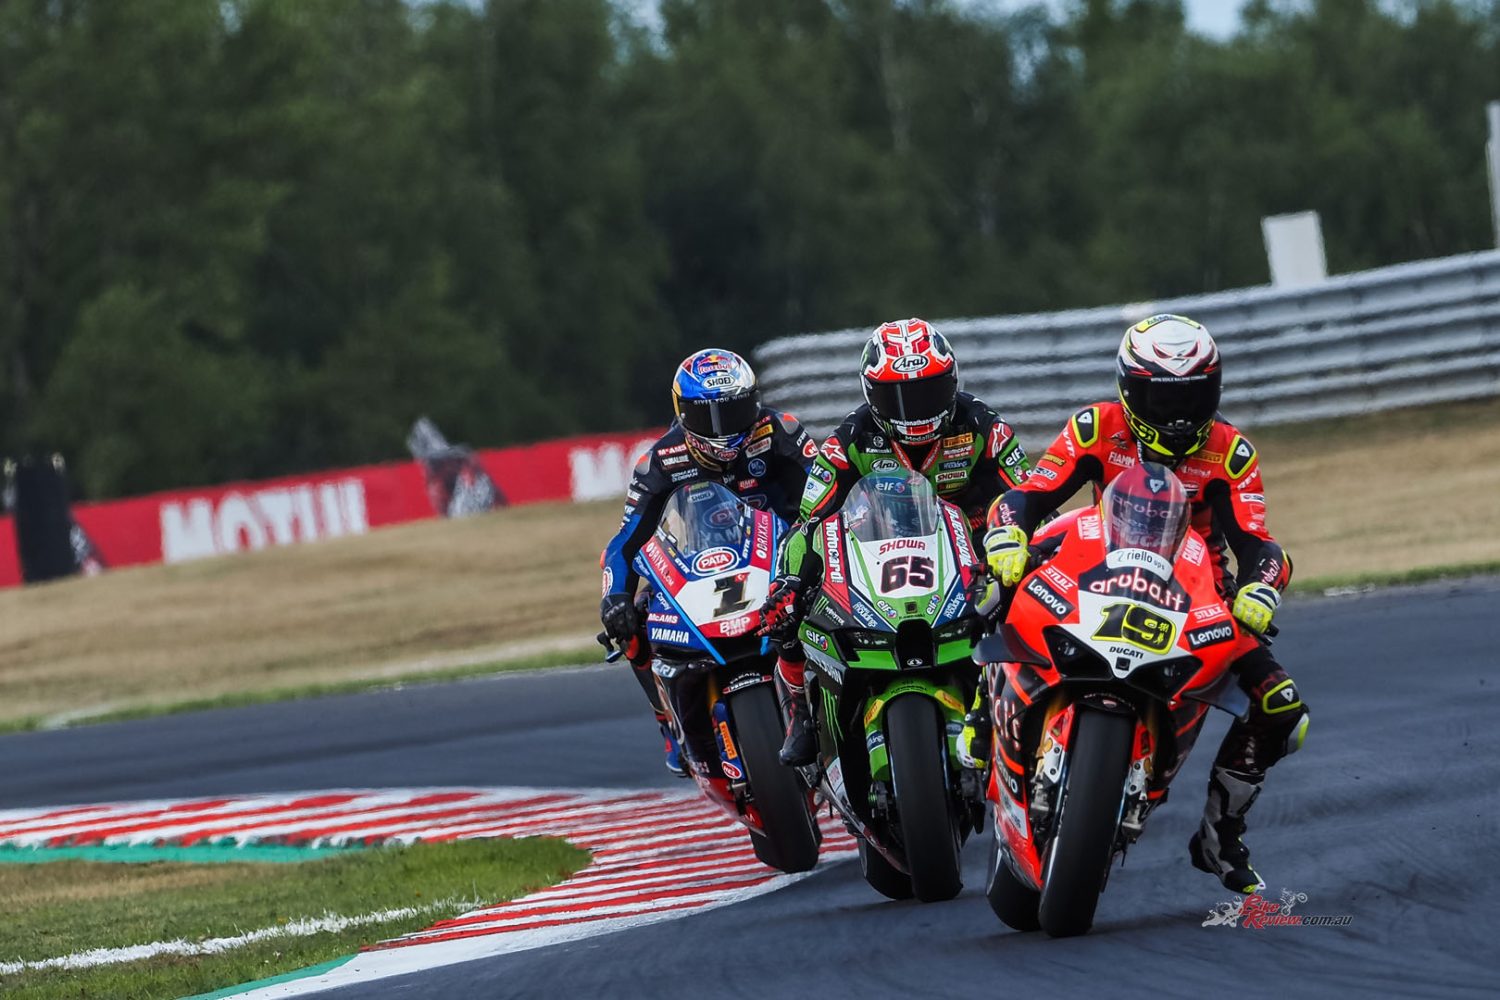 In 2022, the ‘titanic trio’ arrive with the gap shrinking and them getting closer and closer, making for an even more interesting dynamic. Who will be ‘magnifique’ at Magny-Cours?